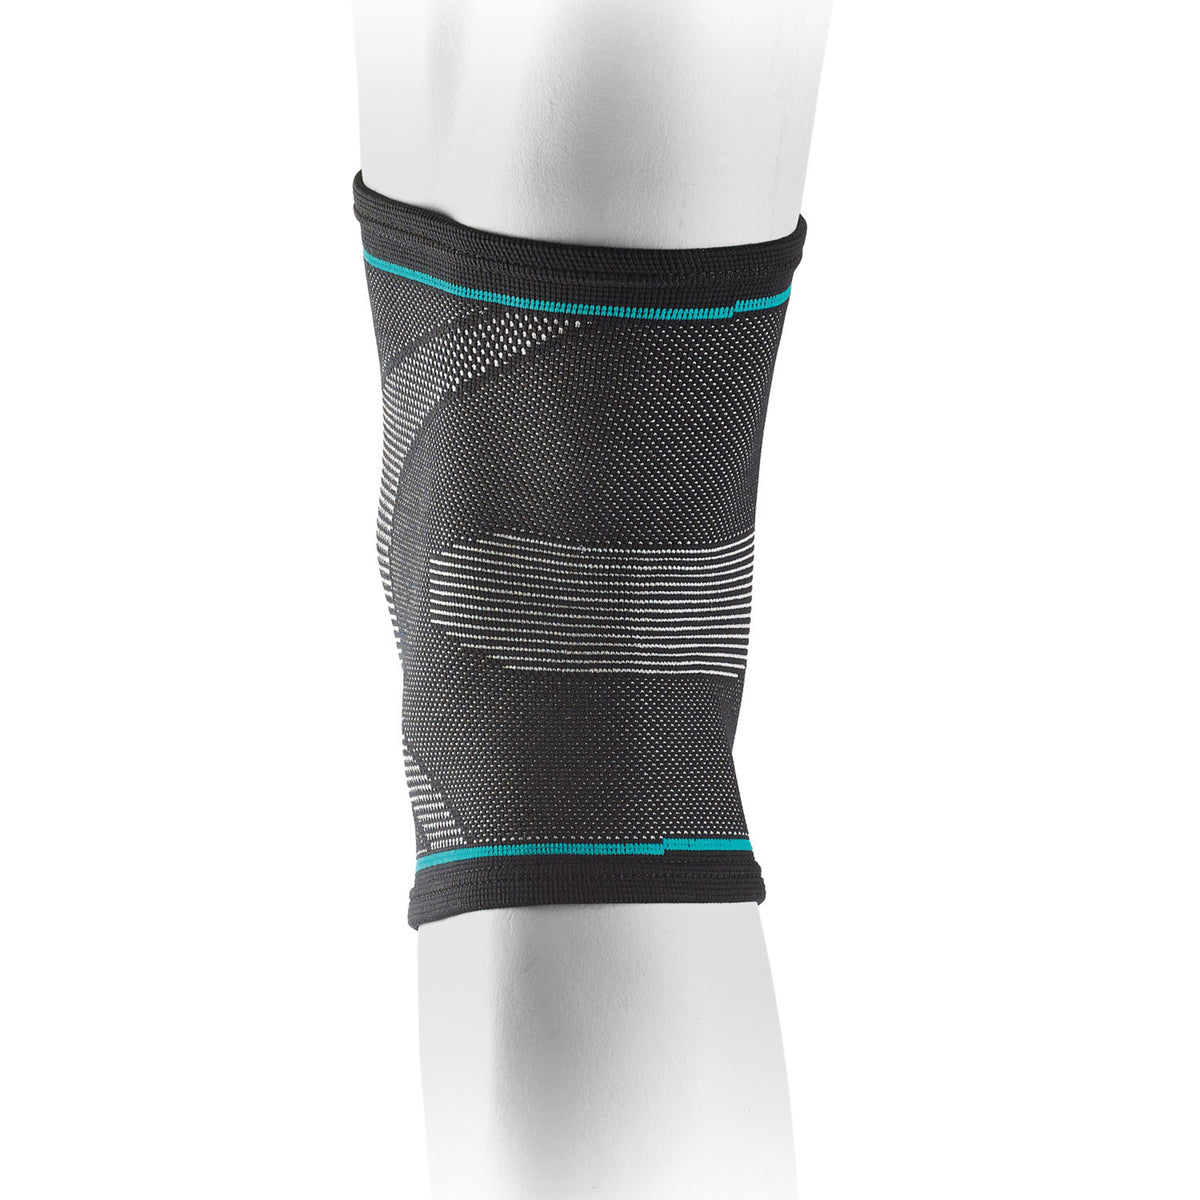 Ultimate Performance Compression Elastic Knee Support